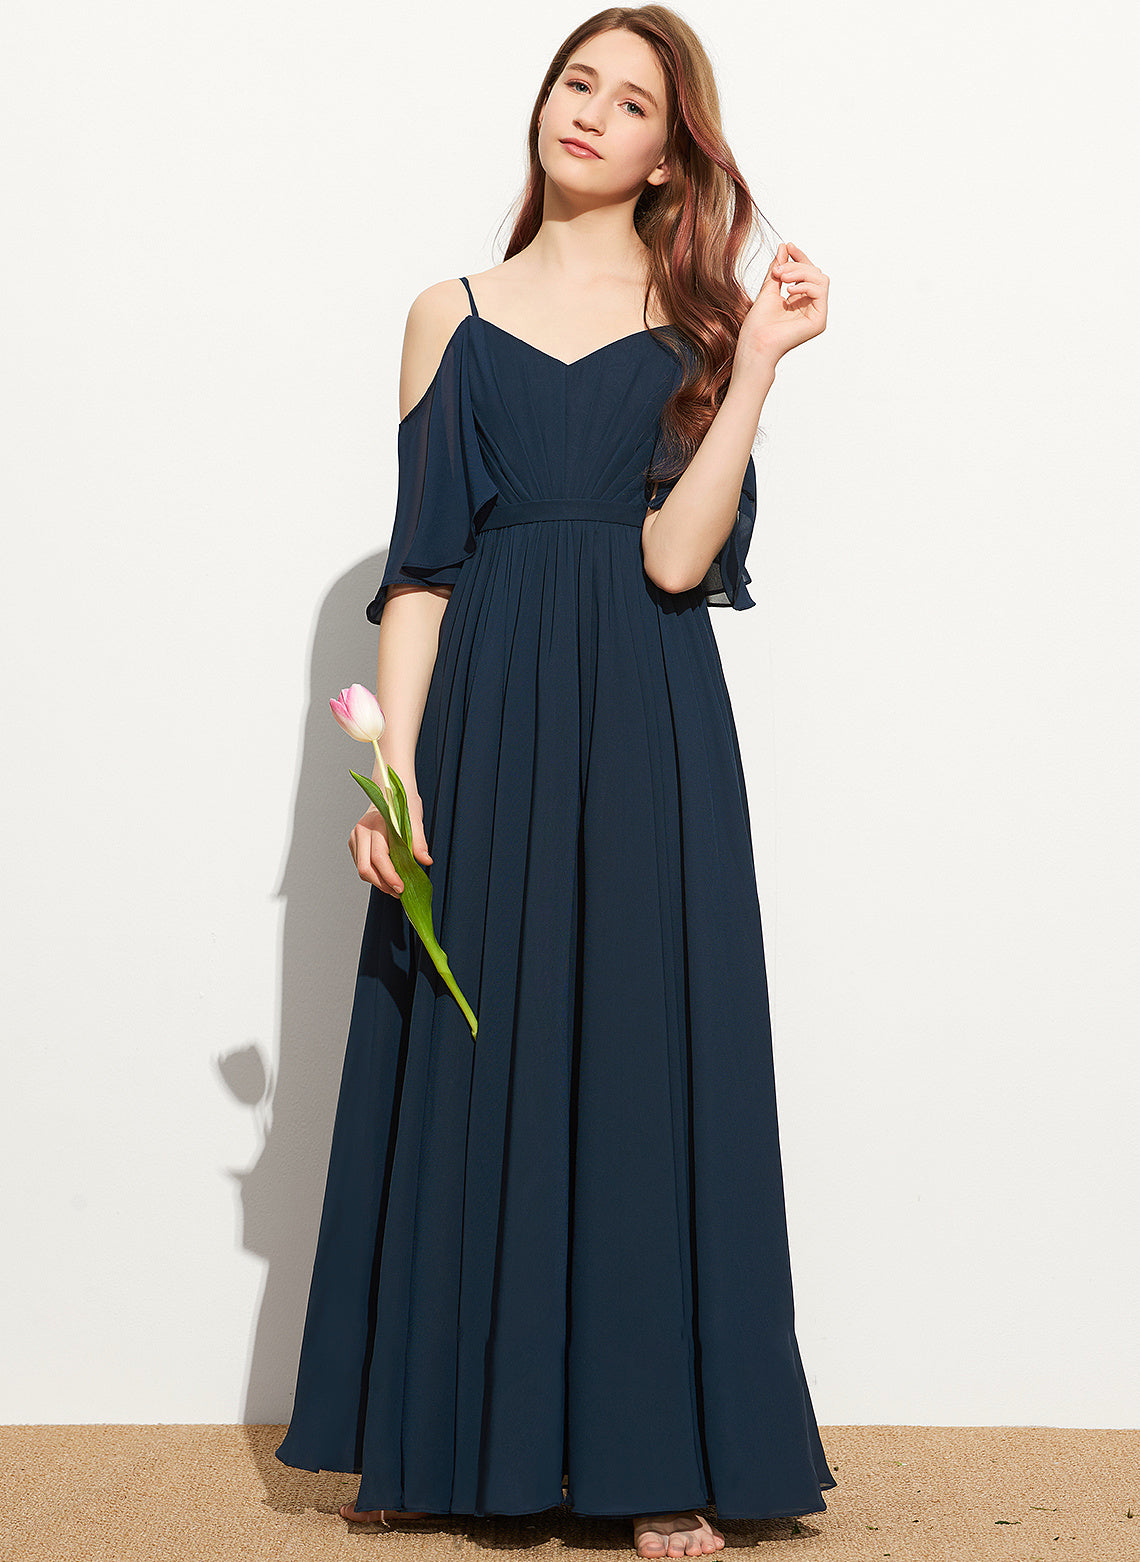 A-Line Campbell Chiffon Off-the-Shoulder With Ruffle Junior Bridesmaid Dresses Floor-Length